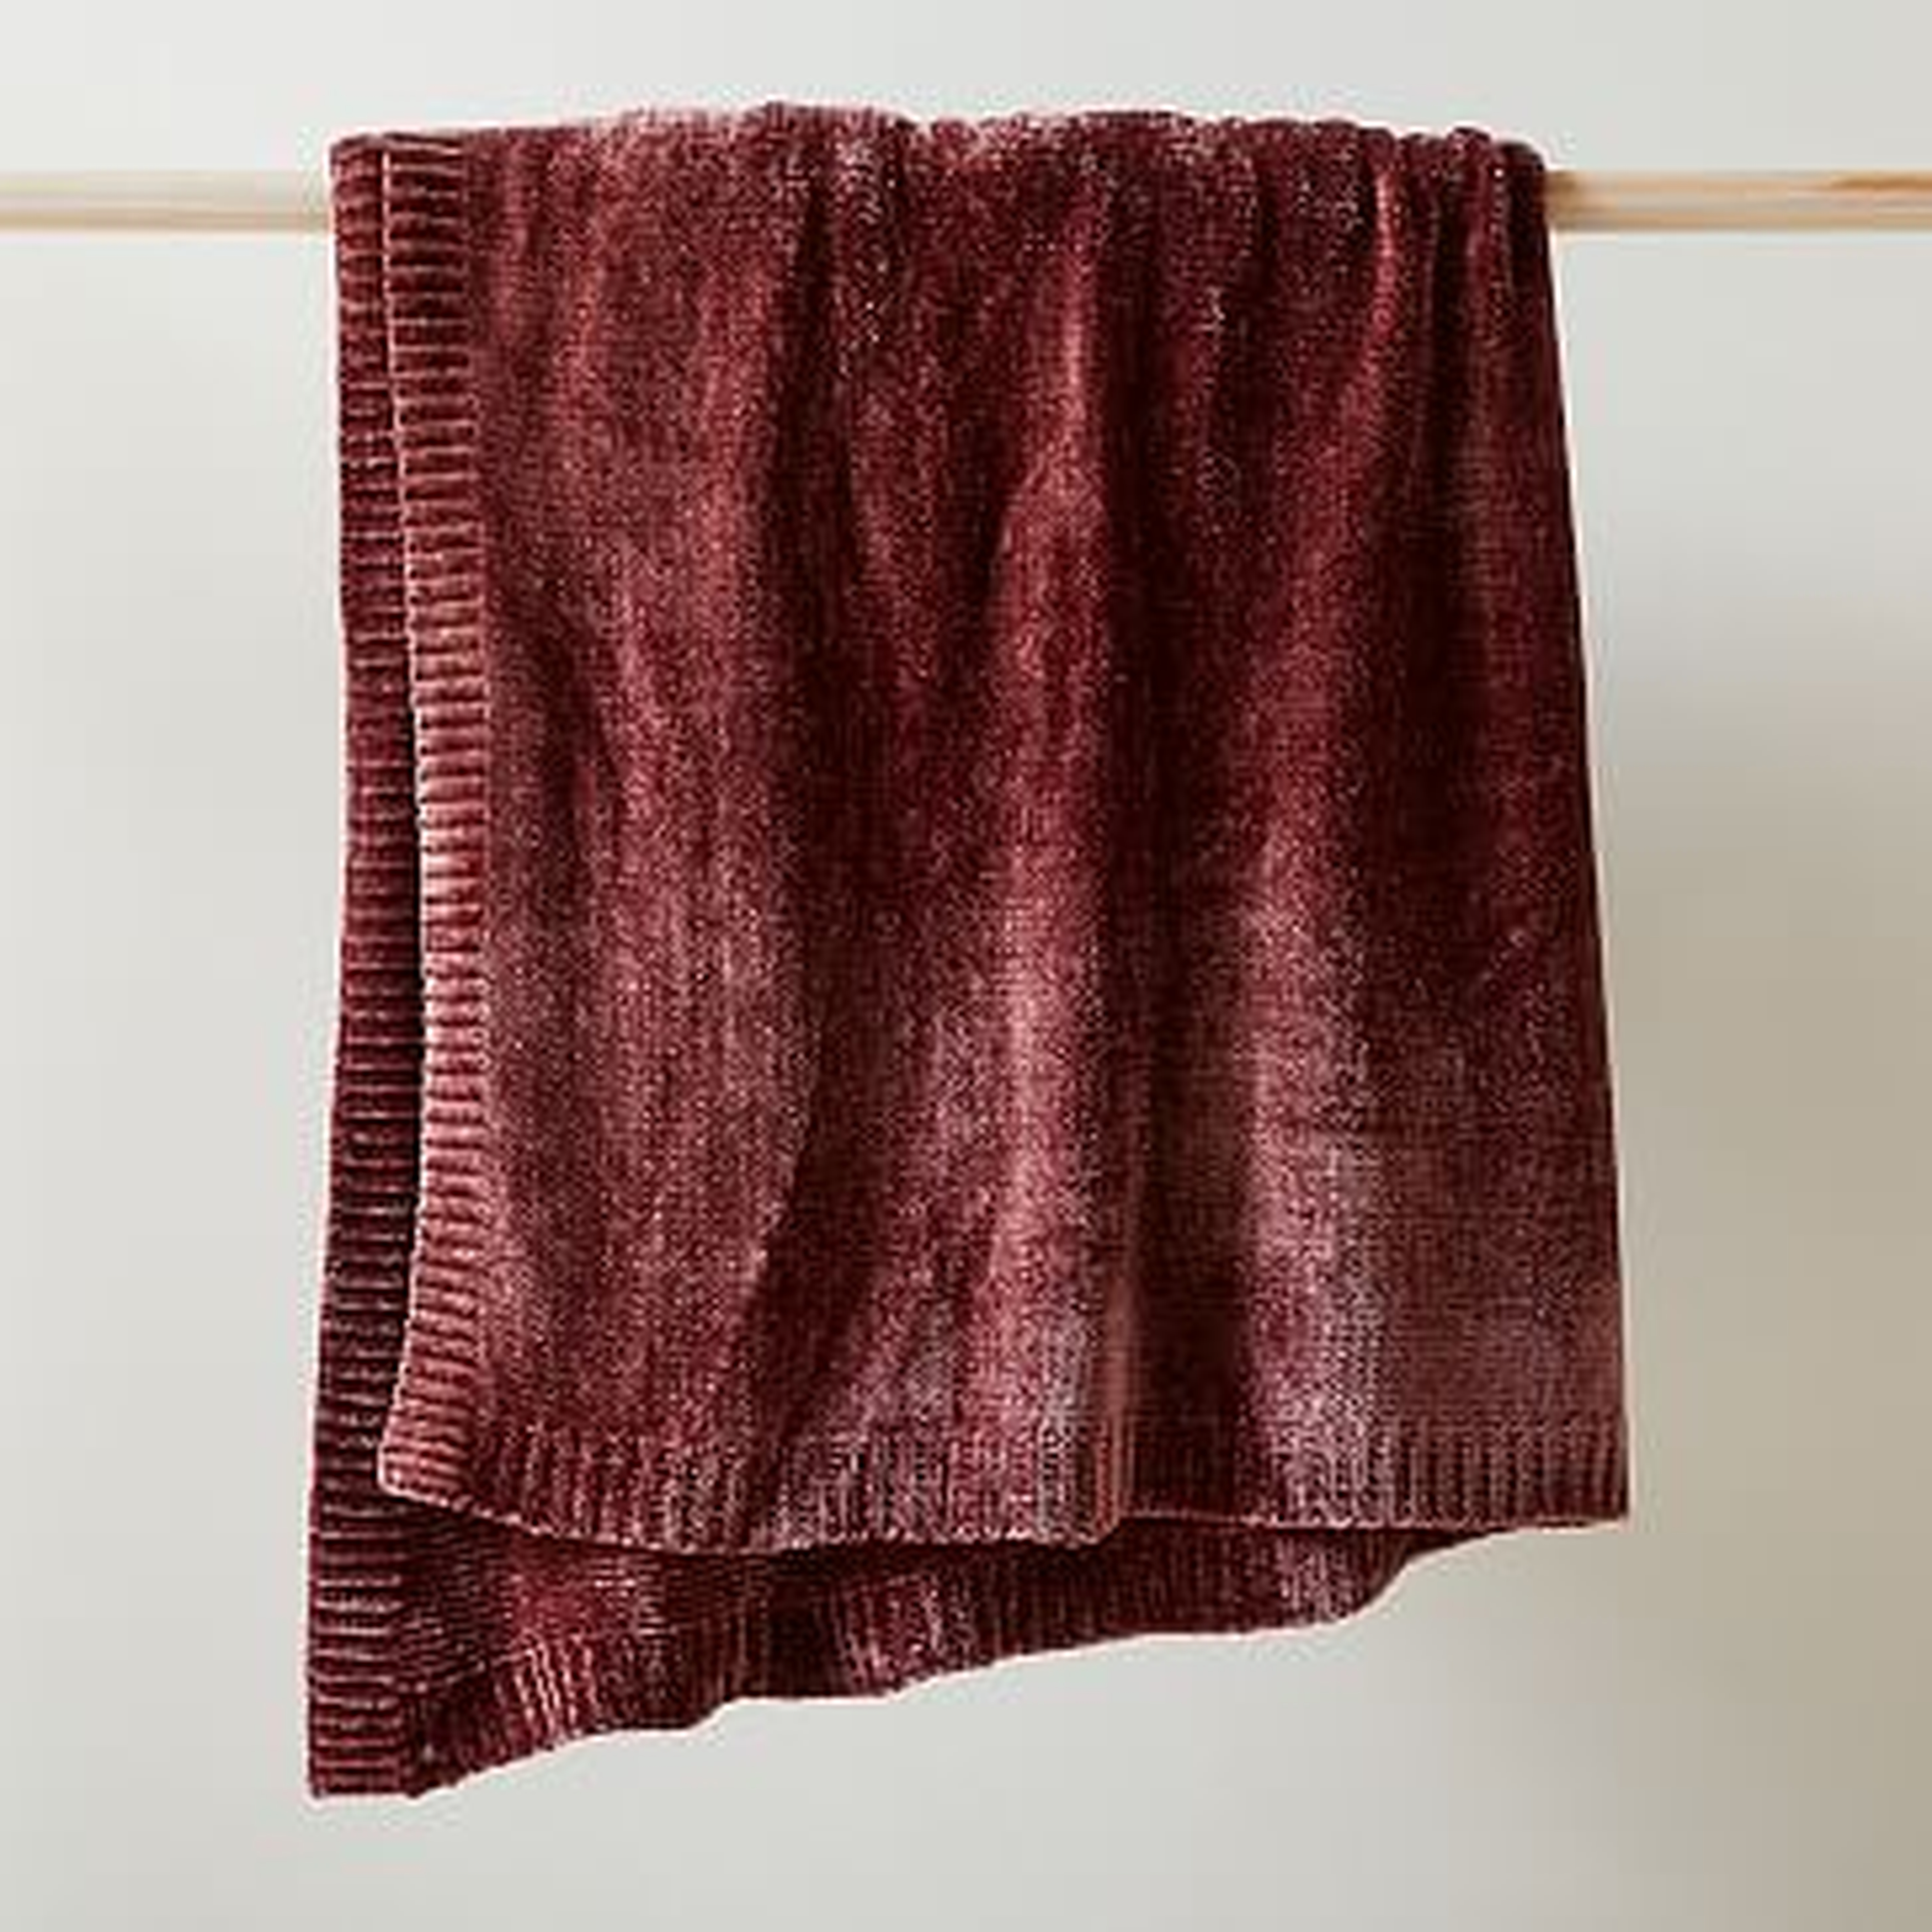 Luxe Chenille Throw, 50"x60", Currant - West Elm